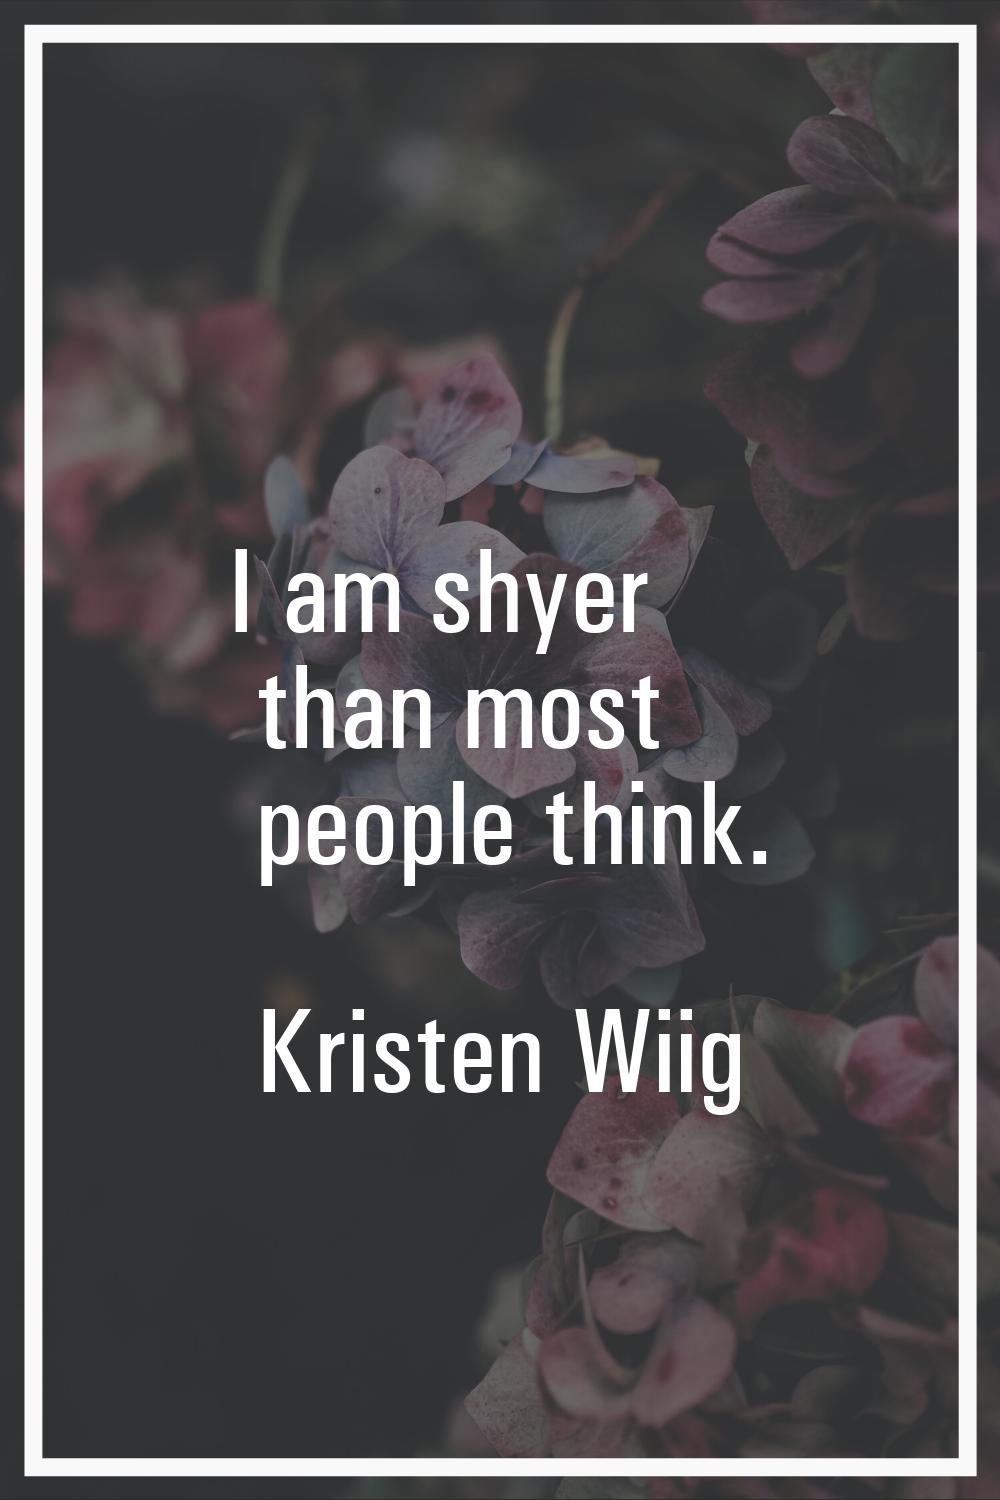 I am shyer than most people think.